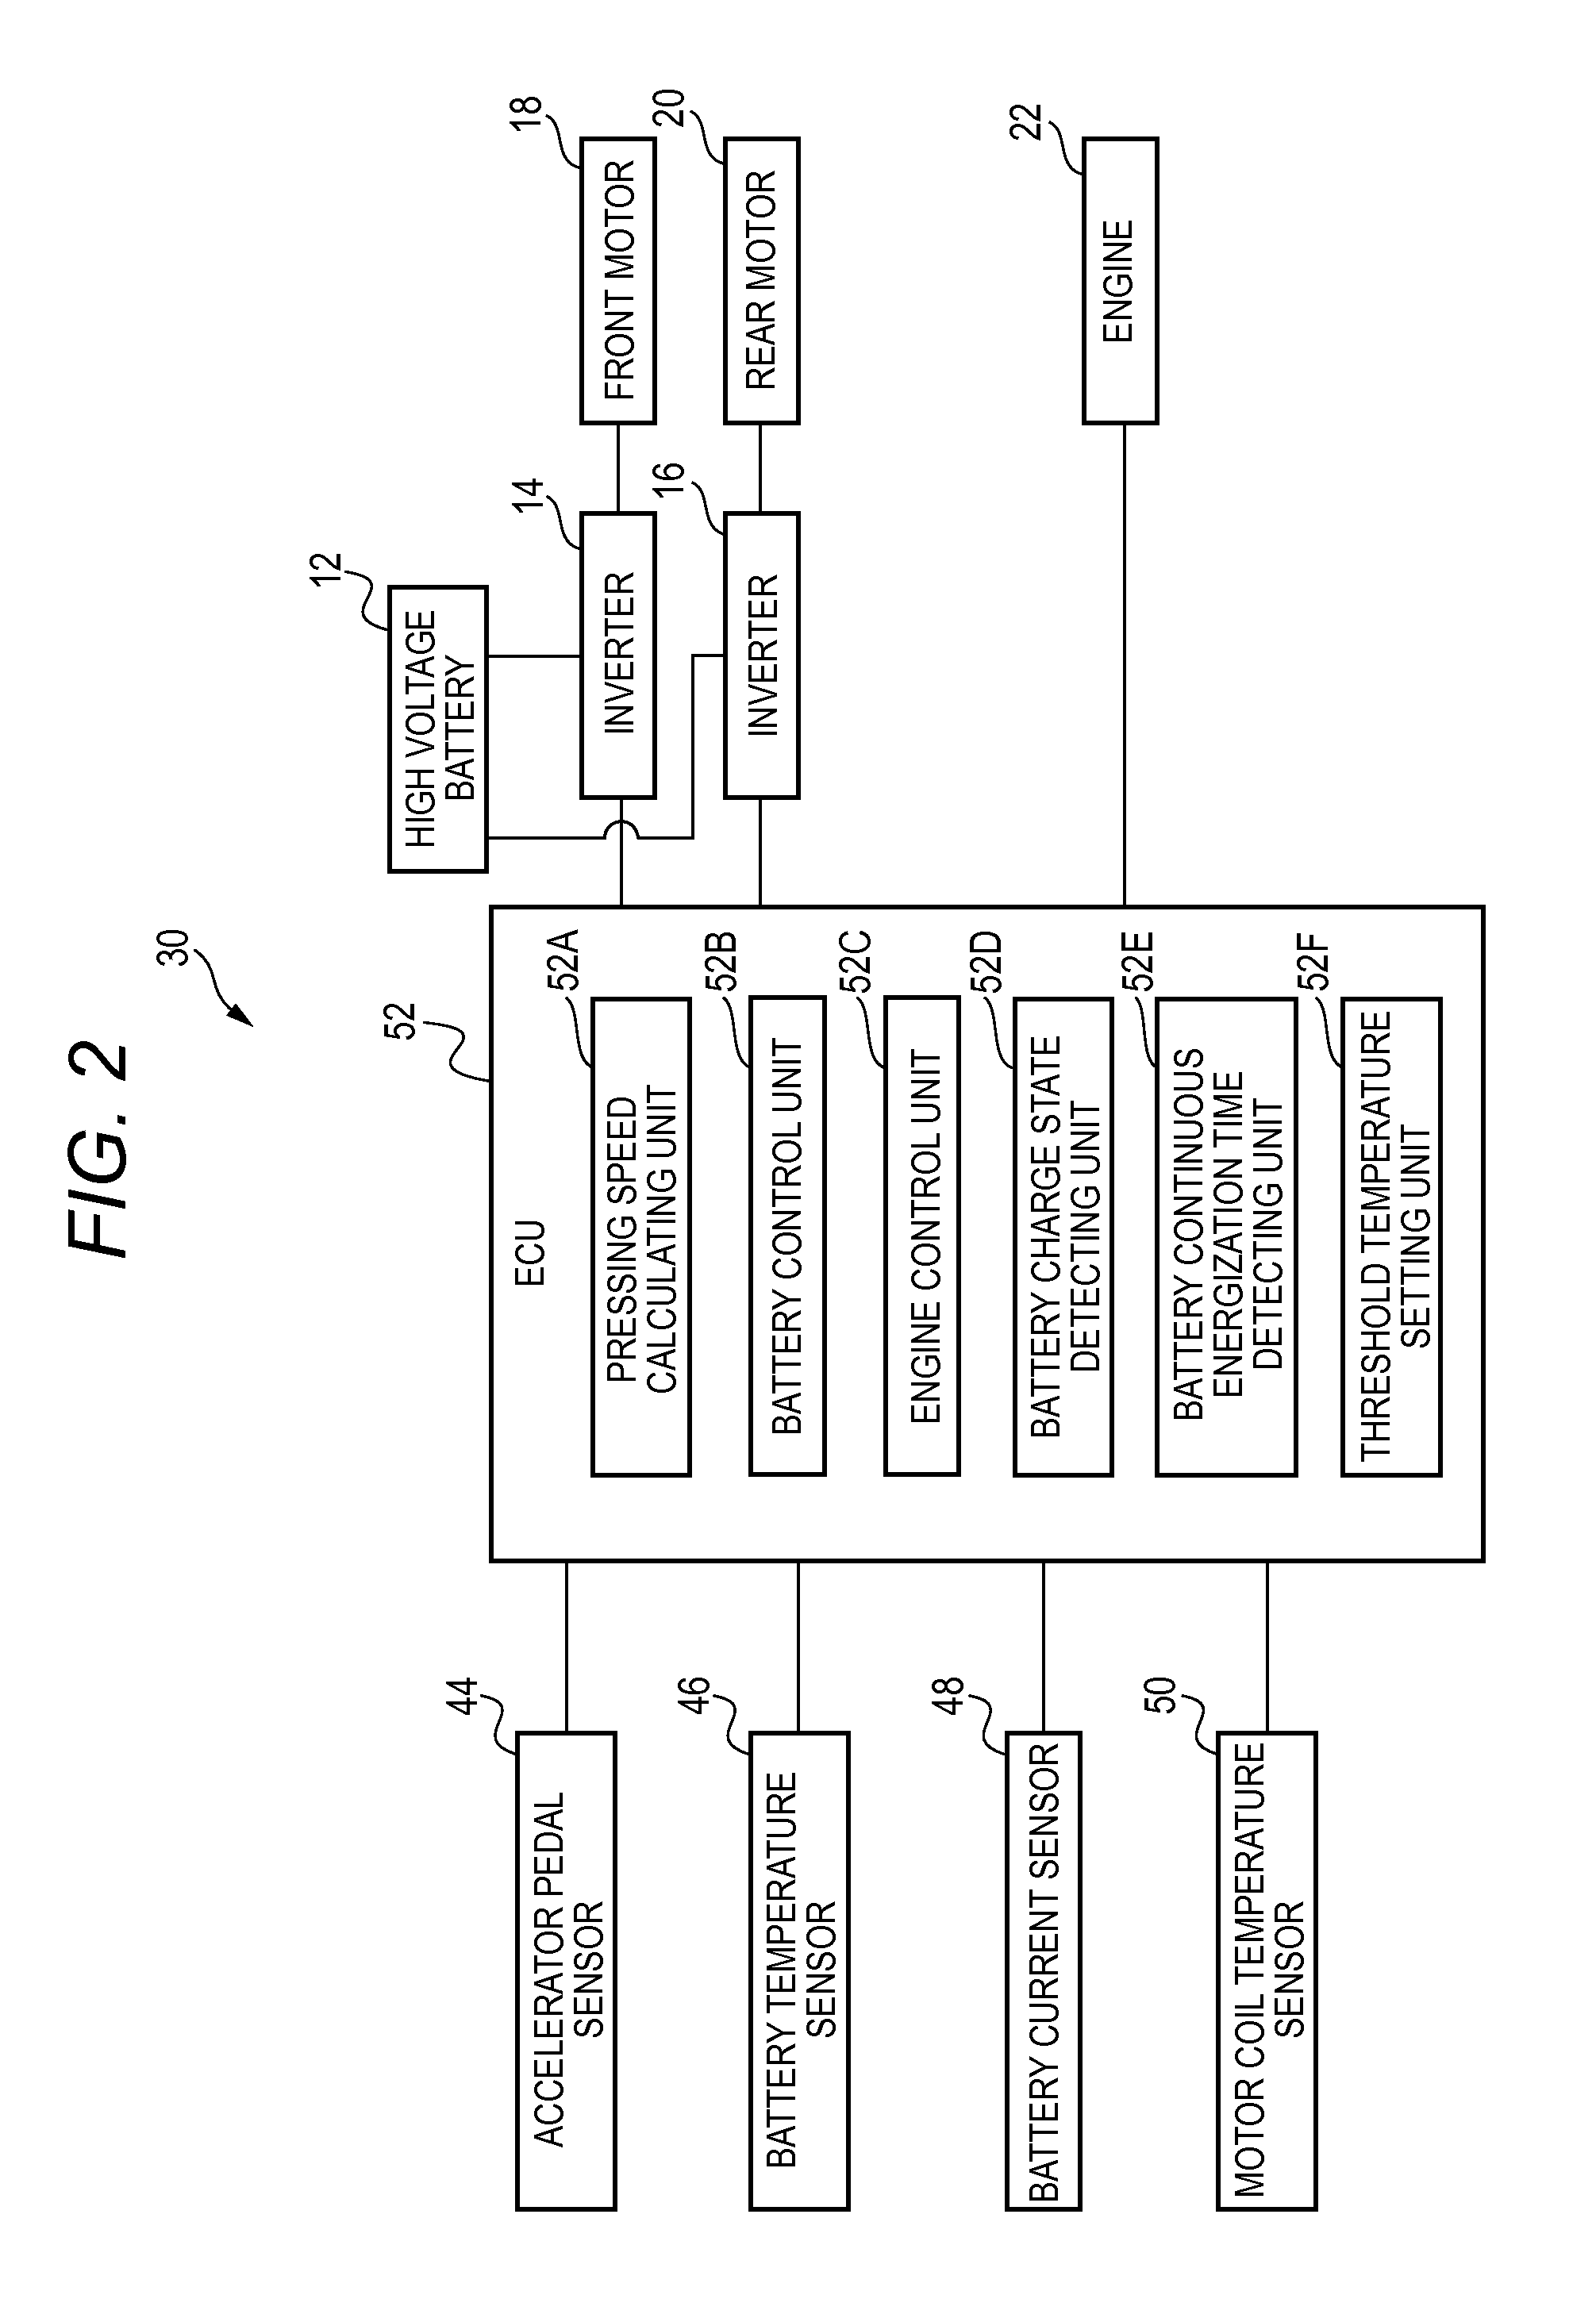 Control apparatus for hybrid electric vehicle